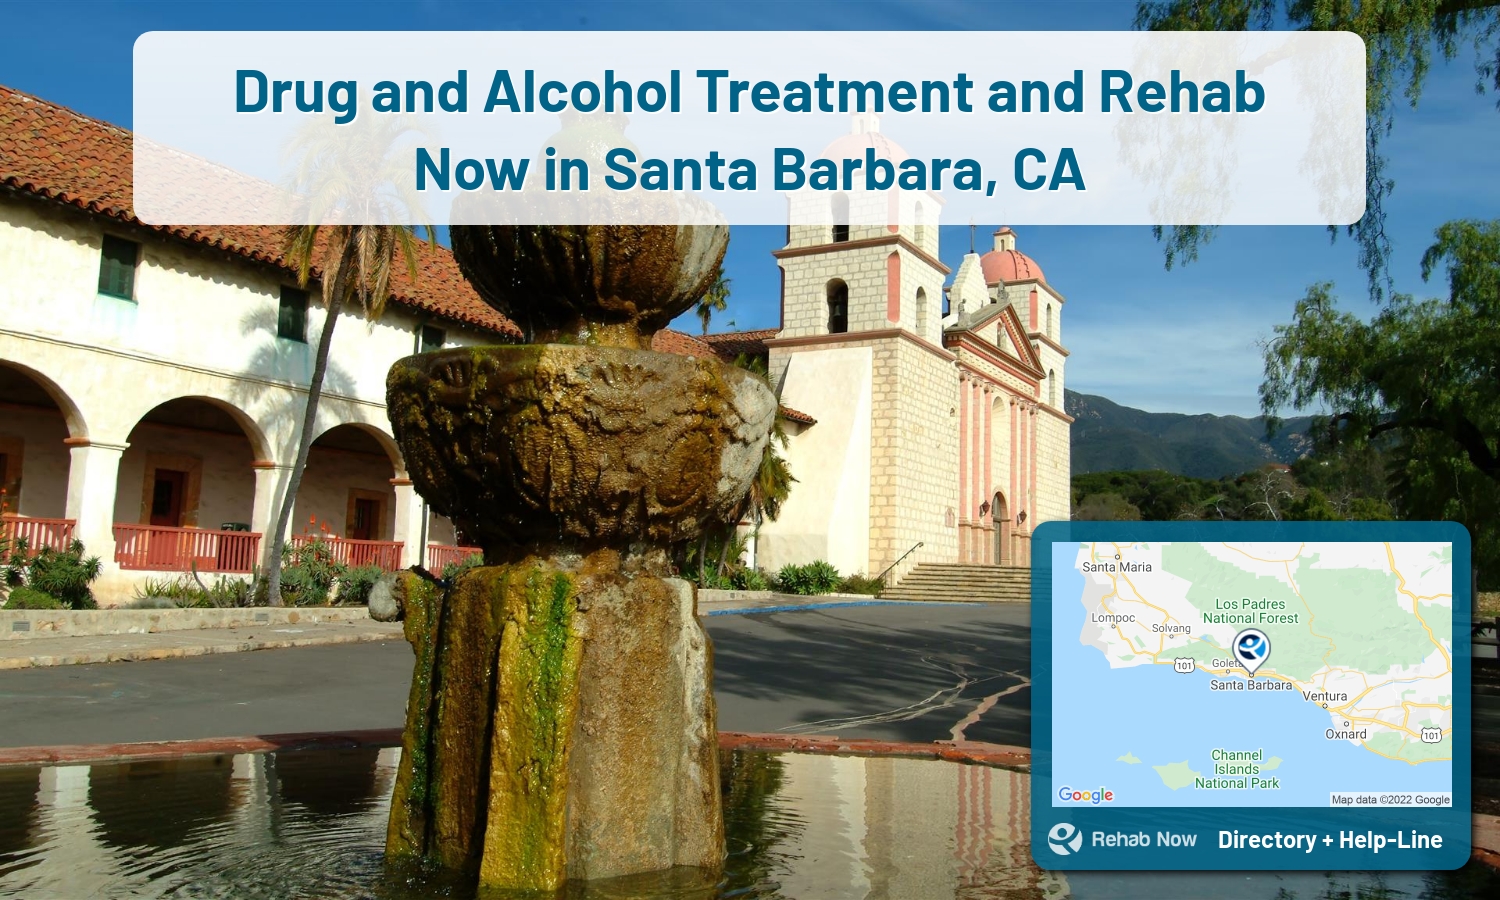 Our experts can help you find treatment now in Santa Barbara, California. We list drug rehab and alcohol centers in California.